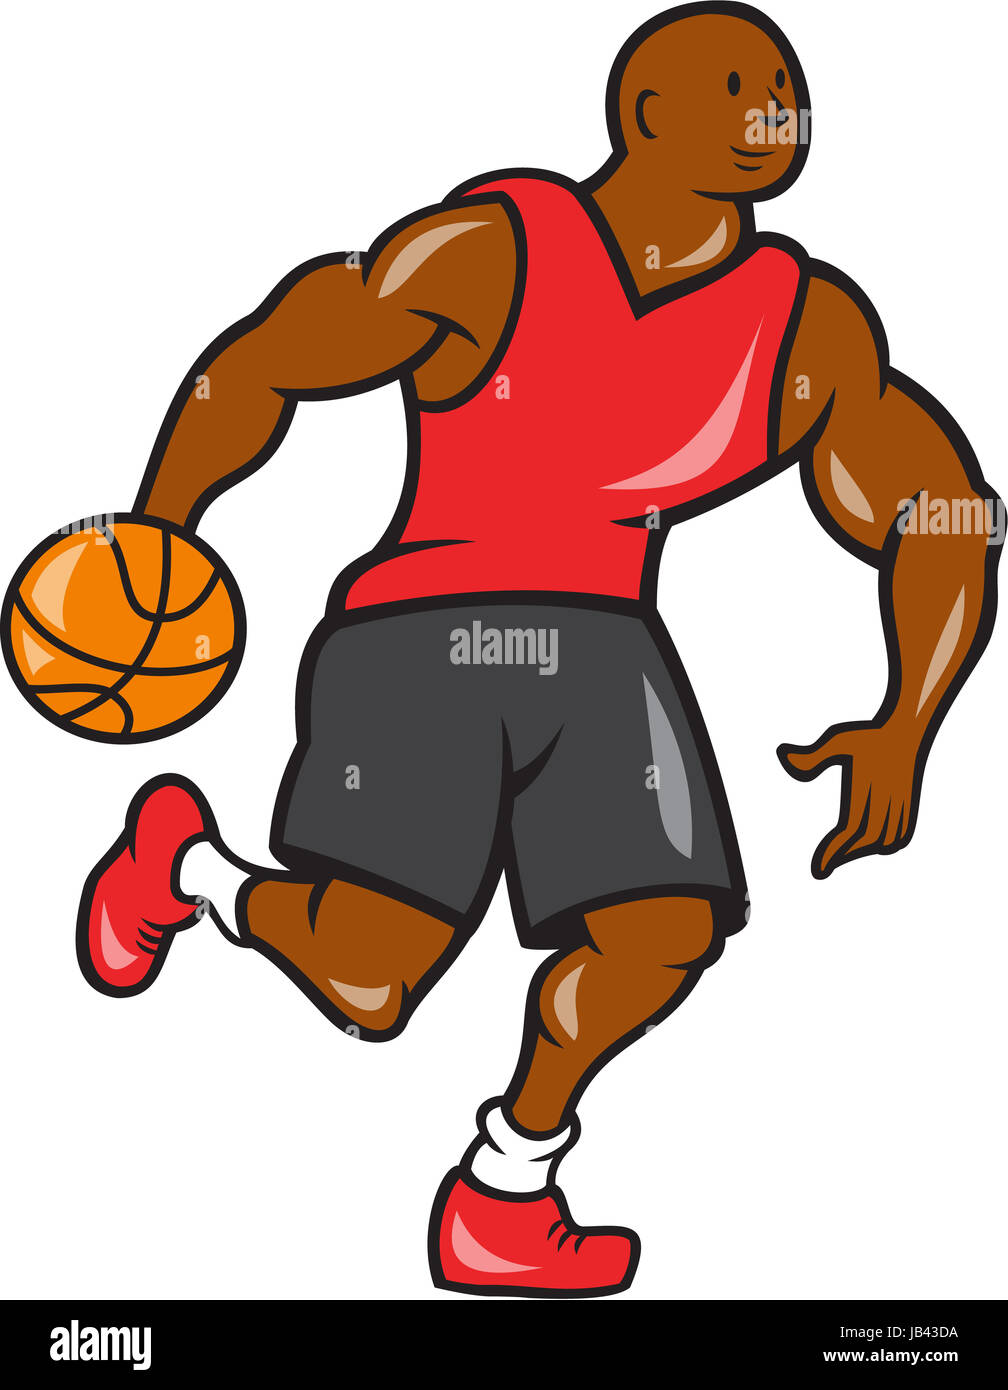 Illustration of a basketball player dribbling ball on isolated white background done in cartoon style. Stock Photo